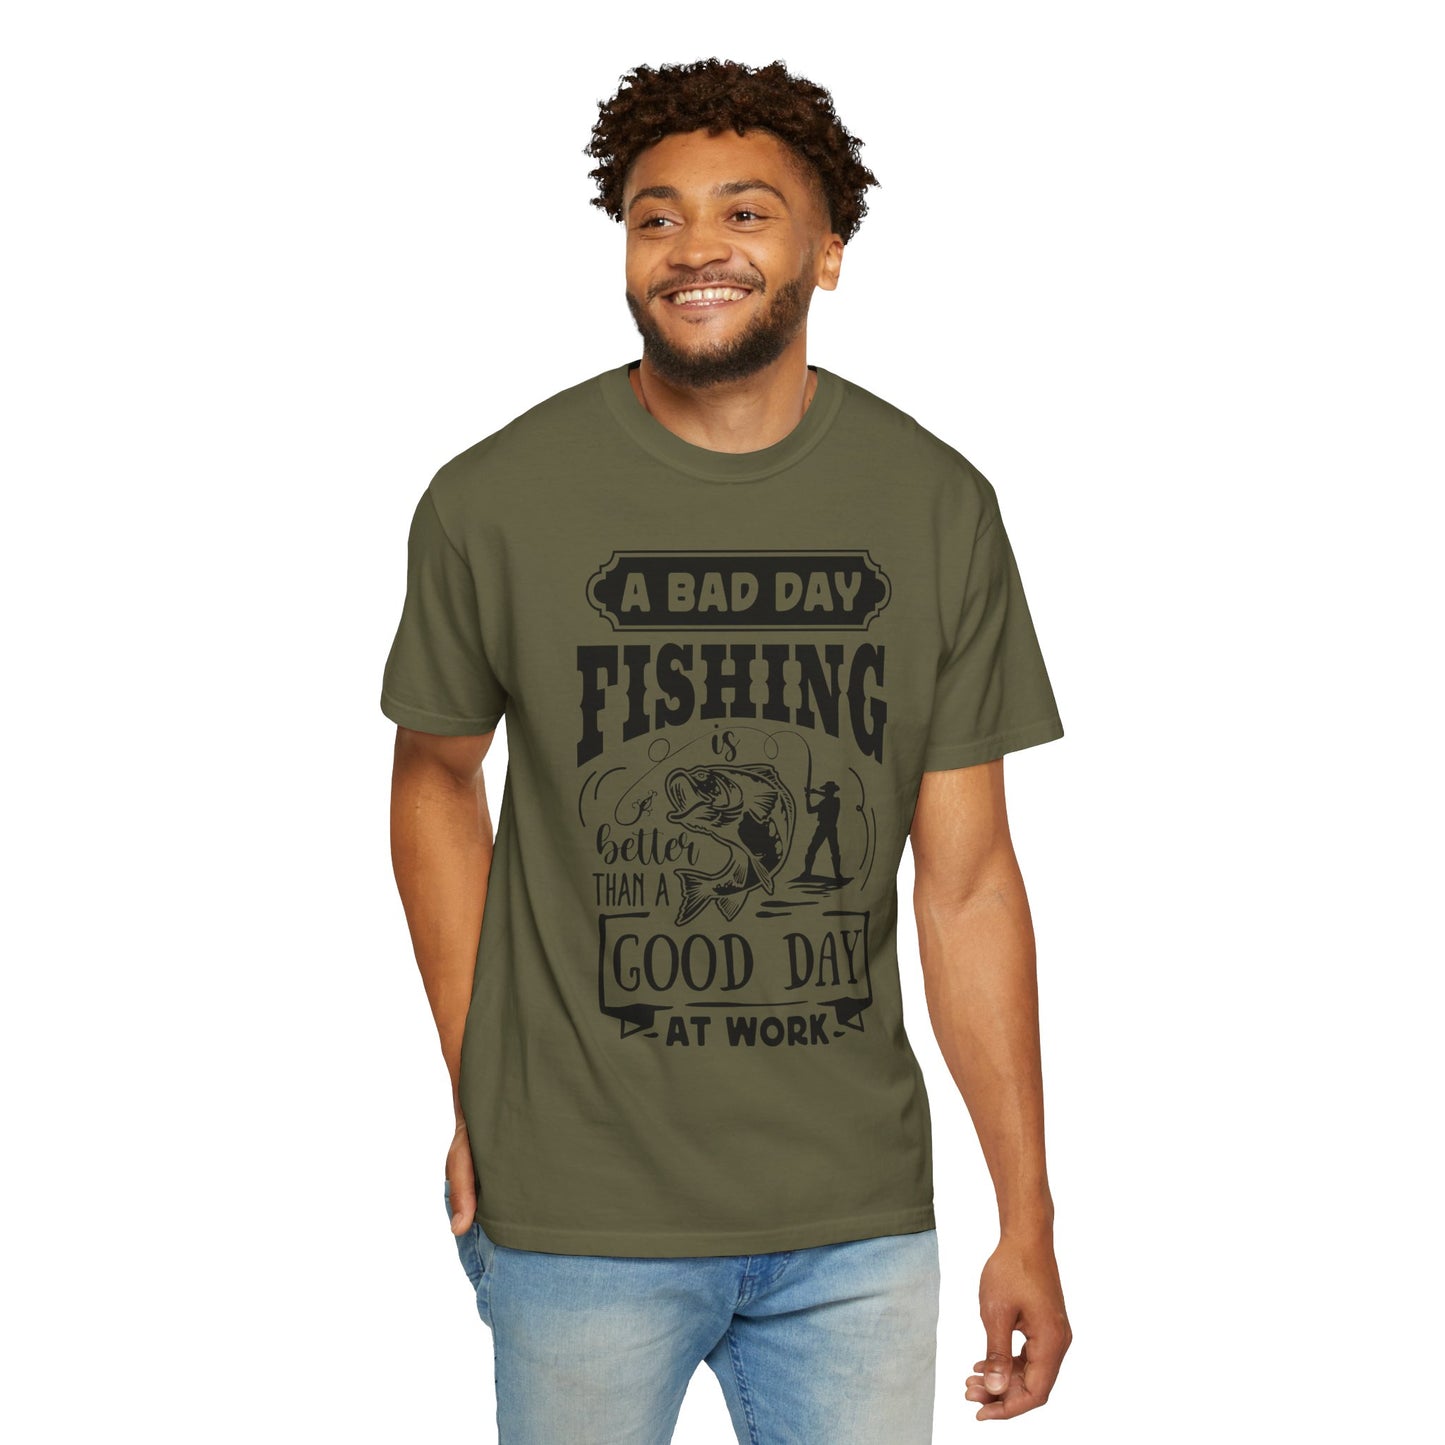 A bad day fishing: Unisex Garment-Dyed T-shirt